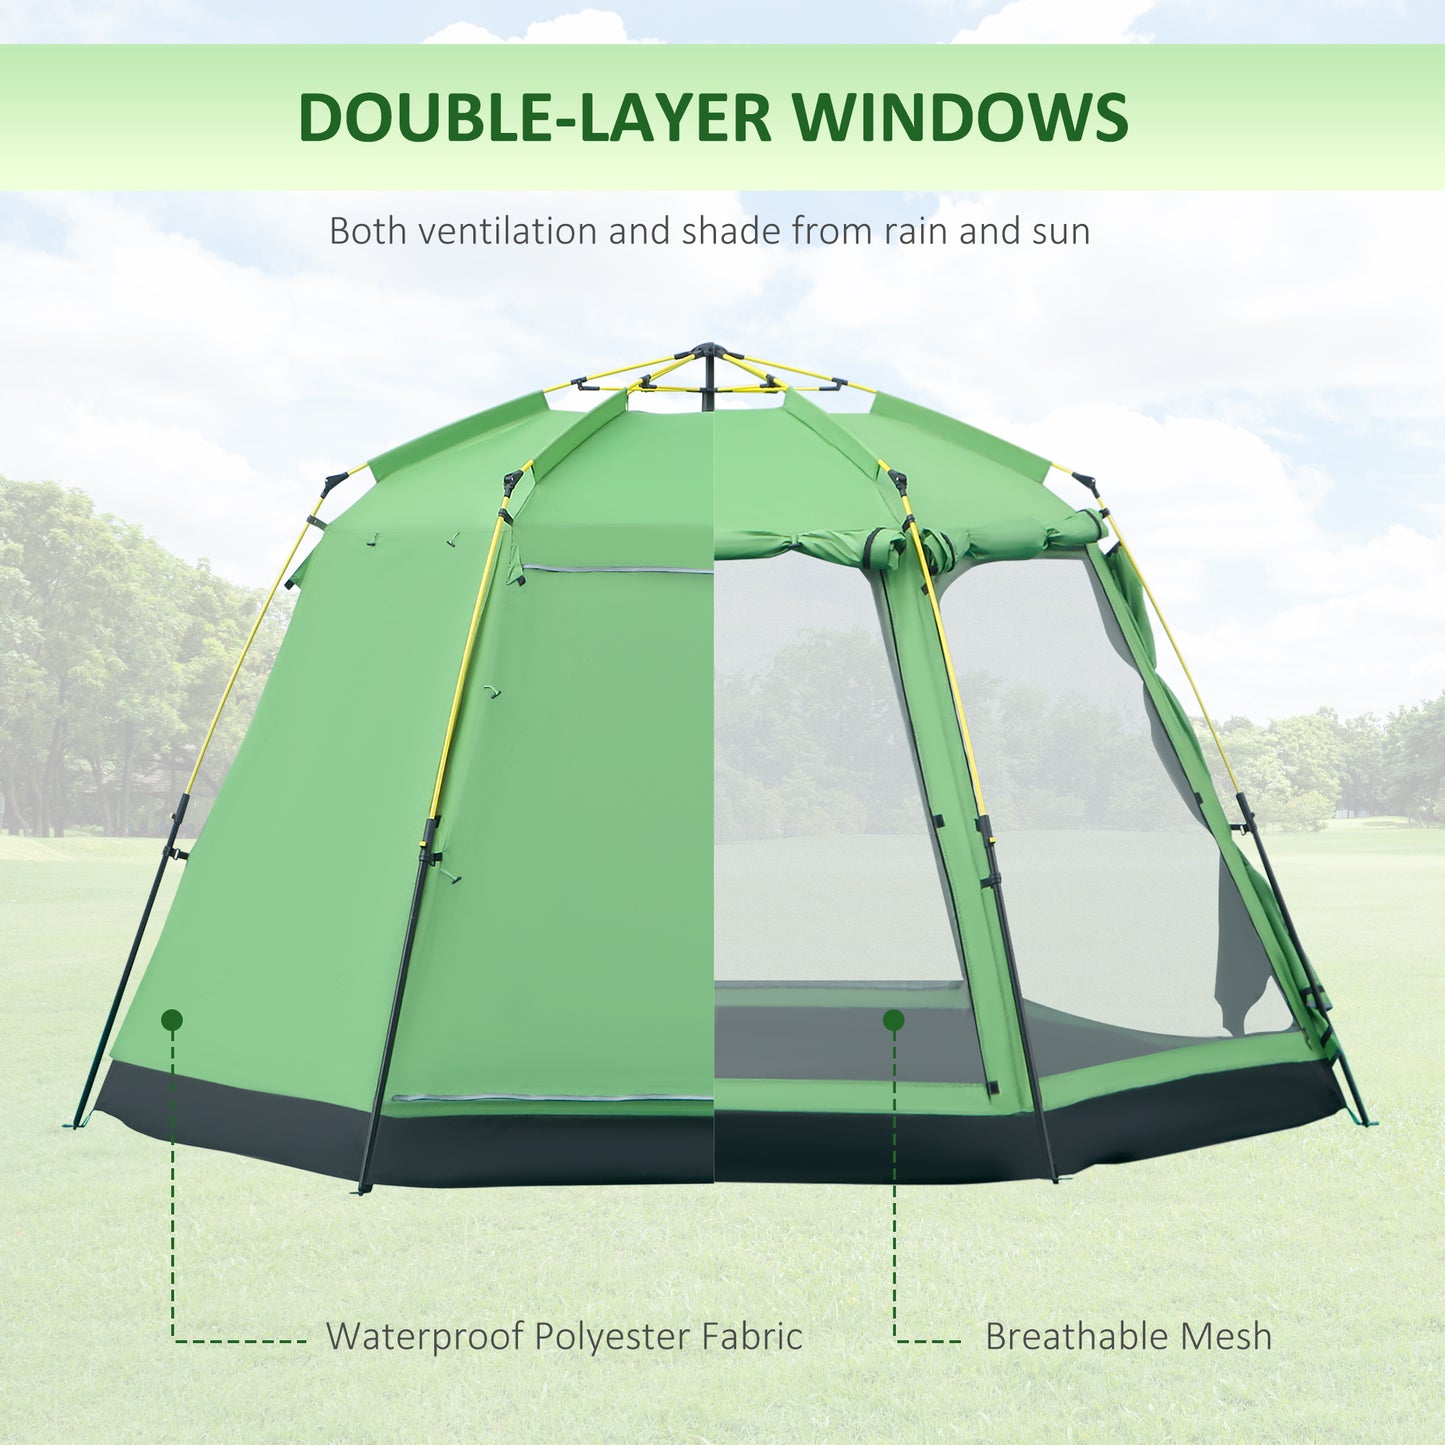 6 People Pop Up Design Camping Tent, 2-Tier Fabric Backpacking Tent with 4 Windows 2 Doors Portable Carry Bag for Fishing Hiking, Green at Gallery Canada